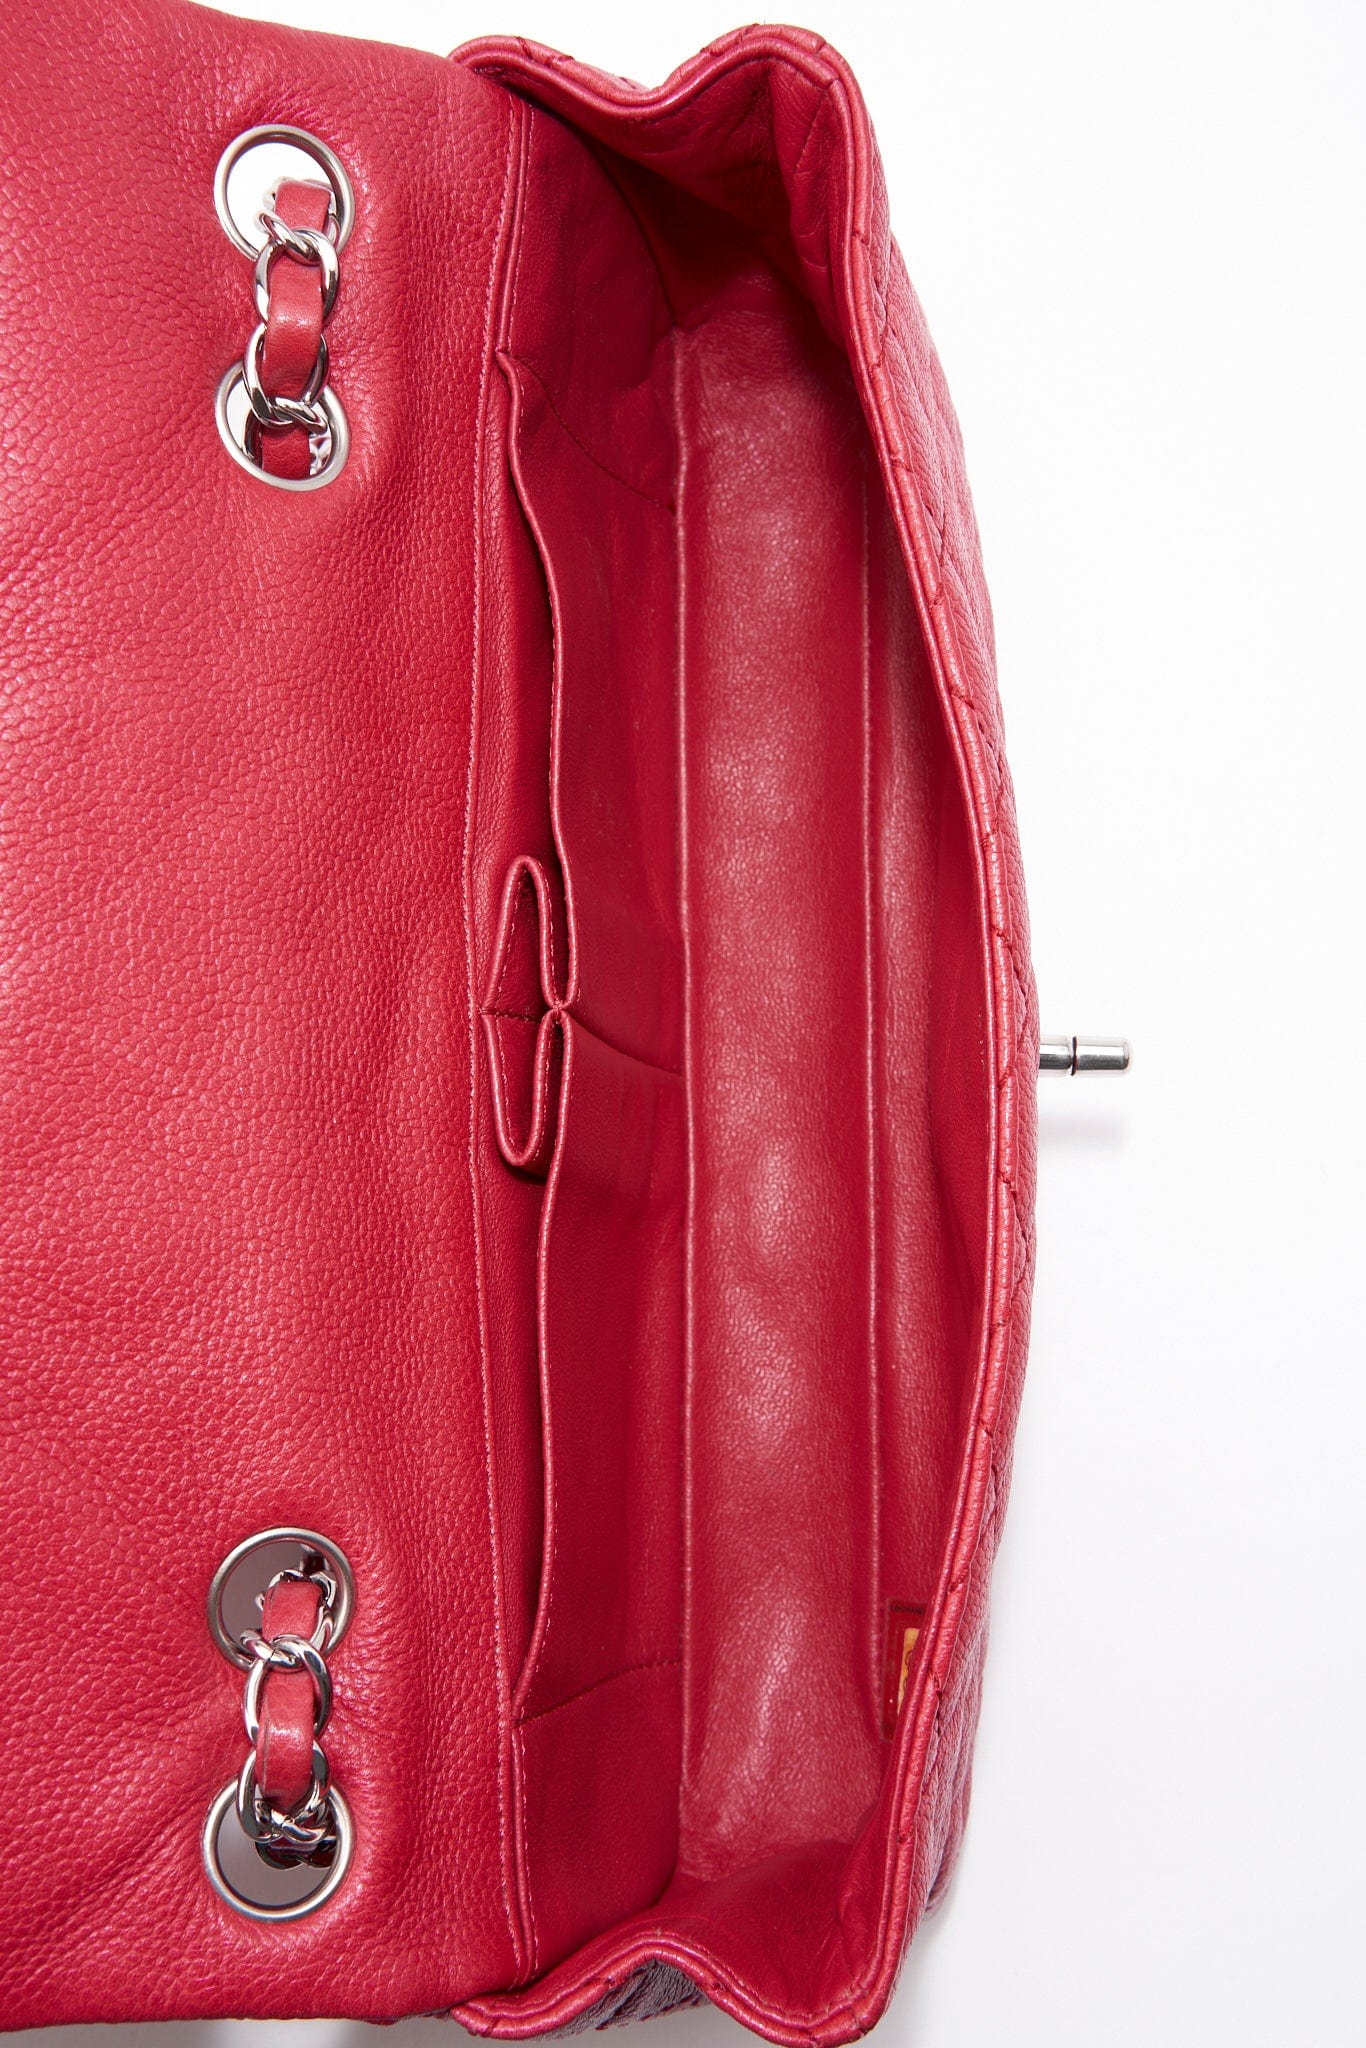 Chanel Red Leather Single Flap